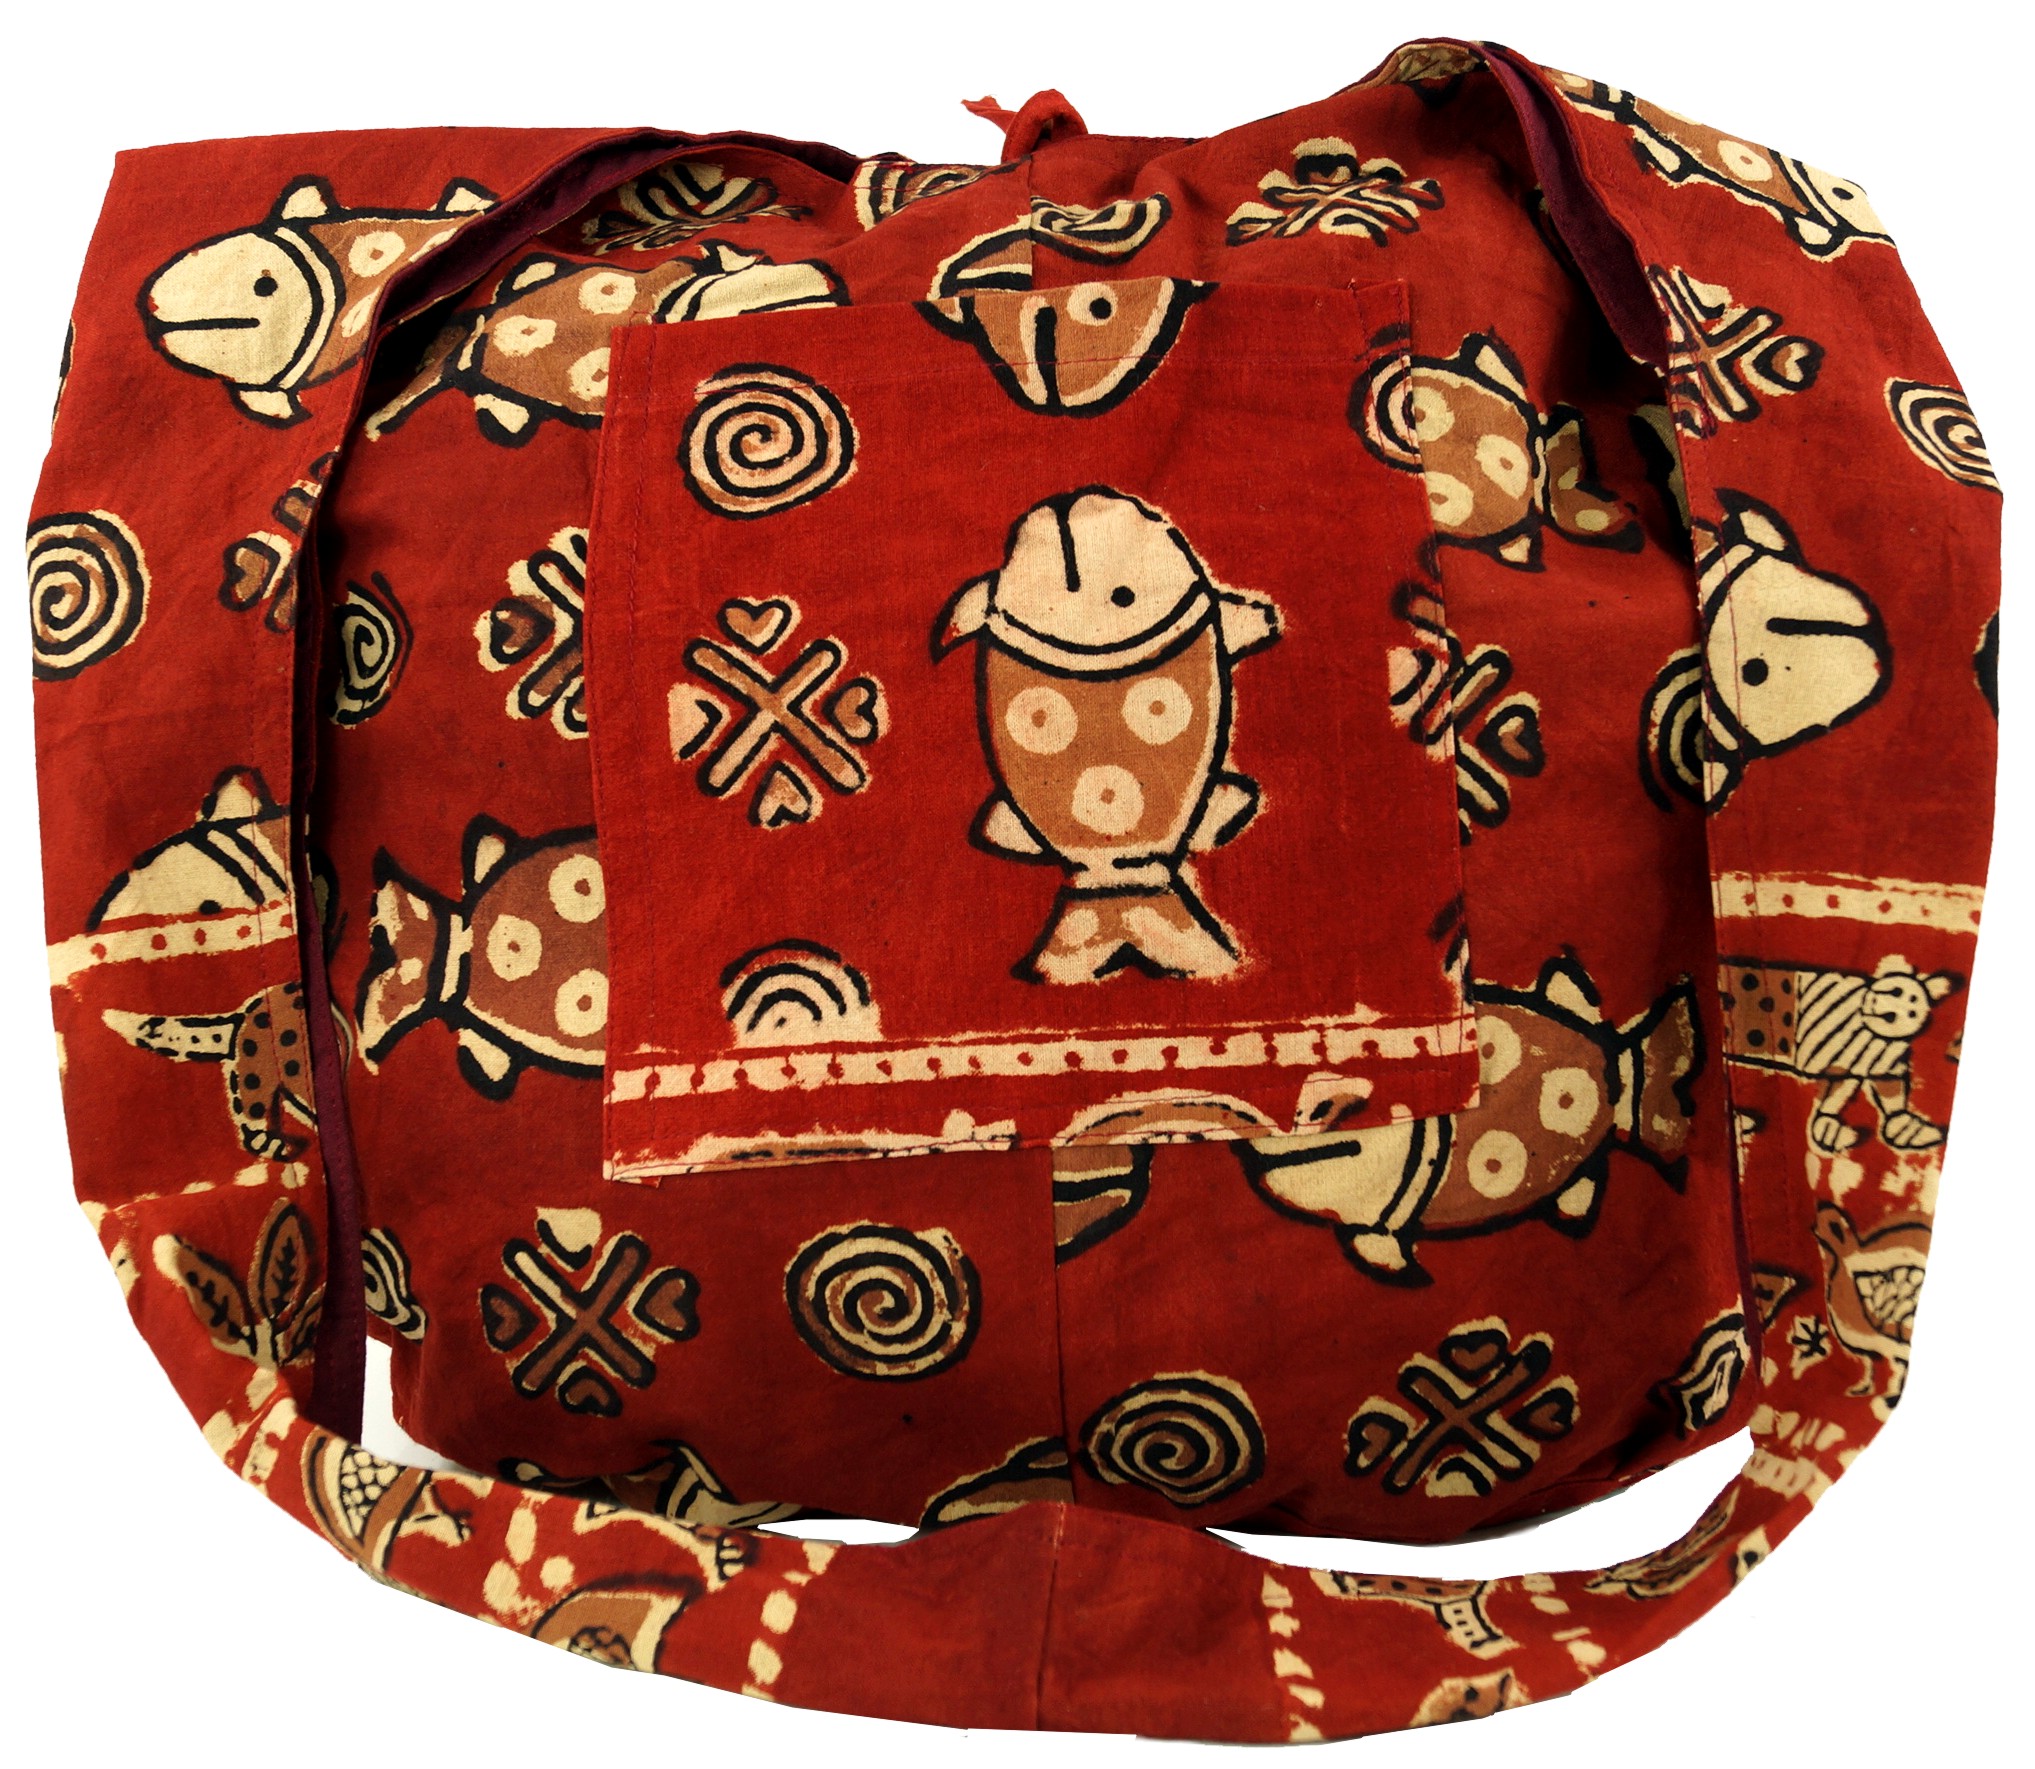 Hill Tribe-Style Cotton Shoulder Bag from Thailand - Earth Love | NOVICA